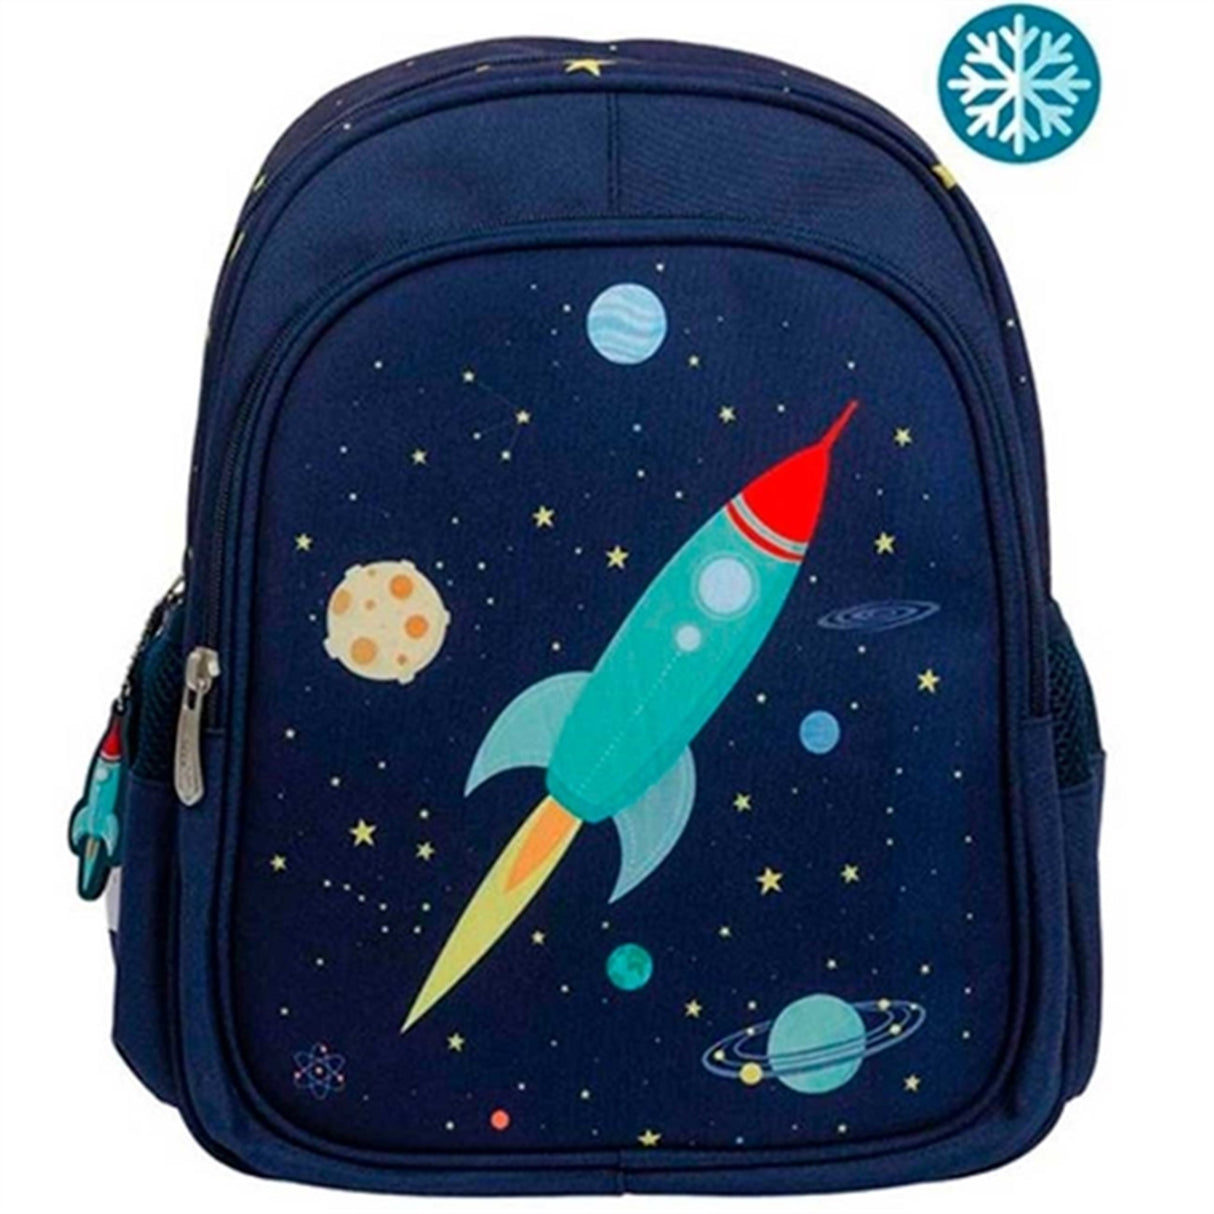 A Little Love Company Little Backpack Space